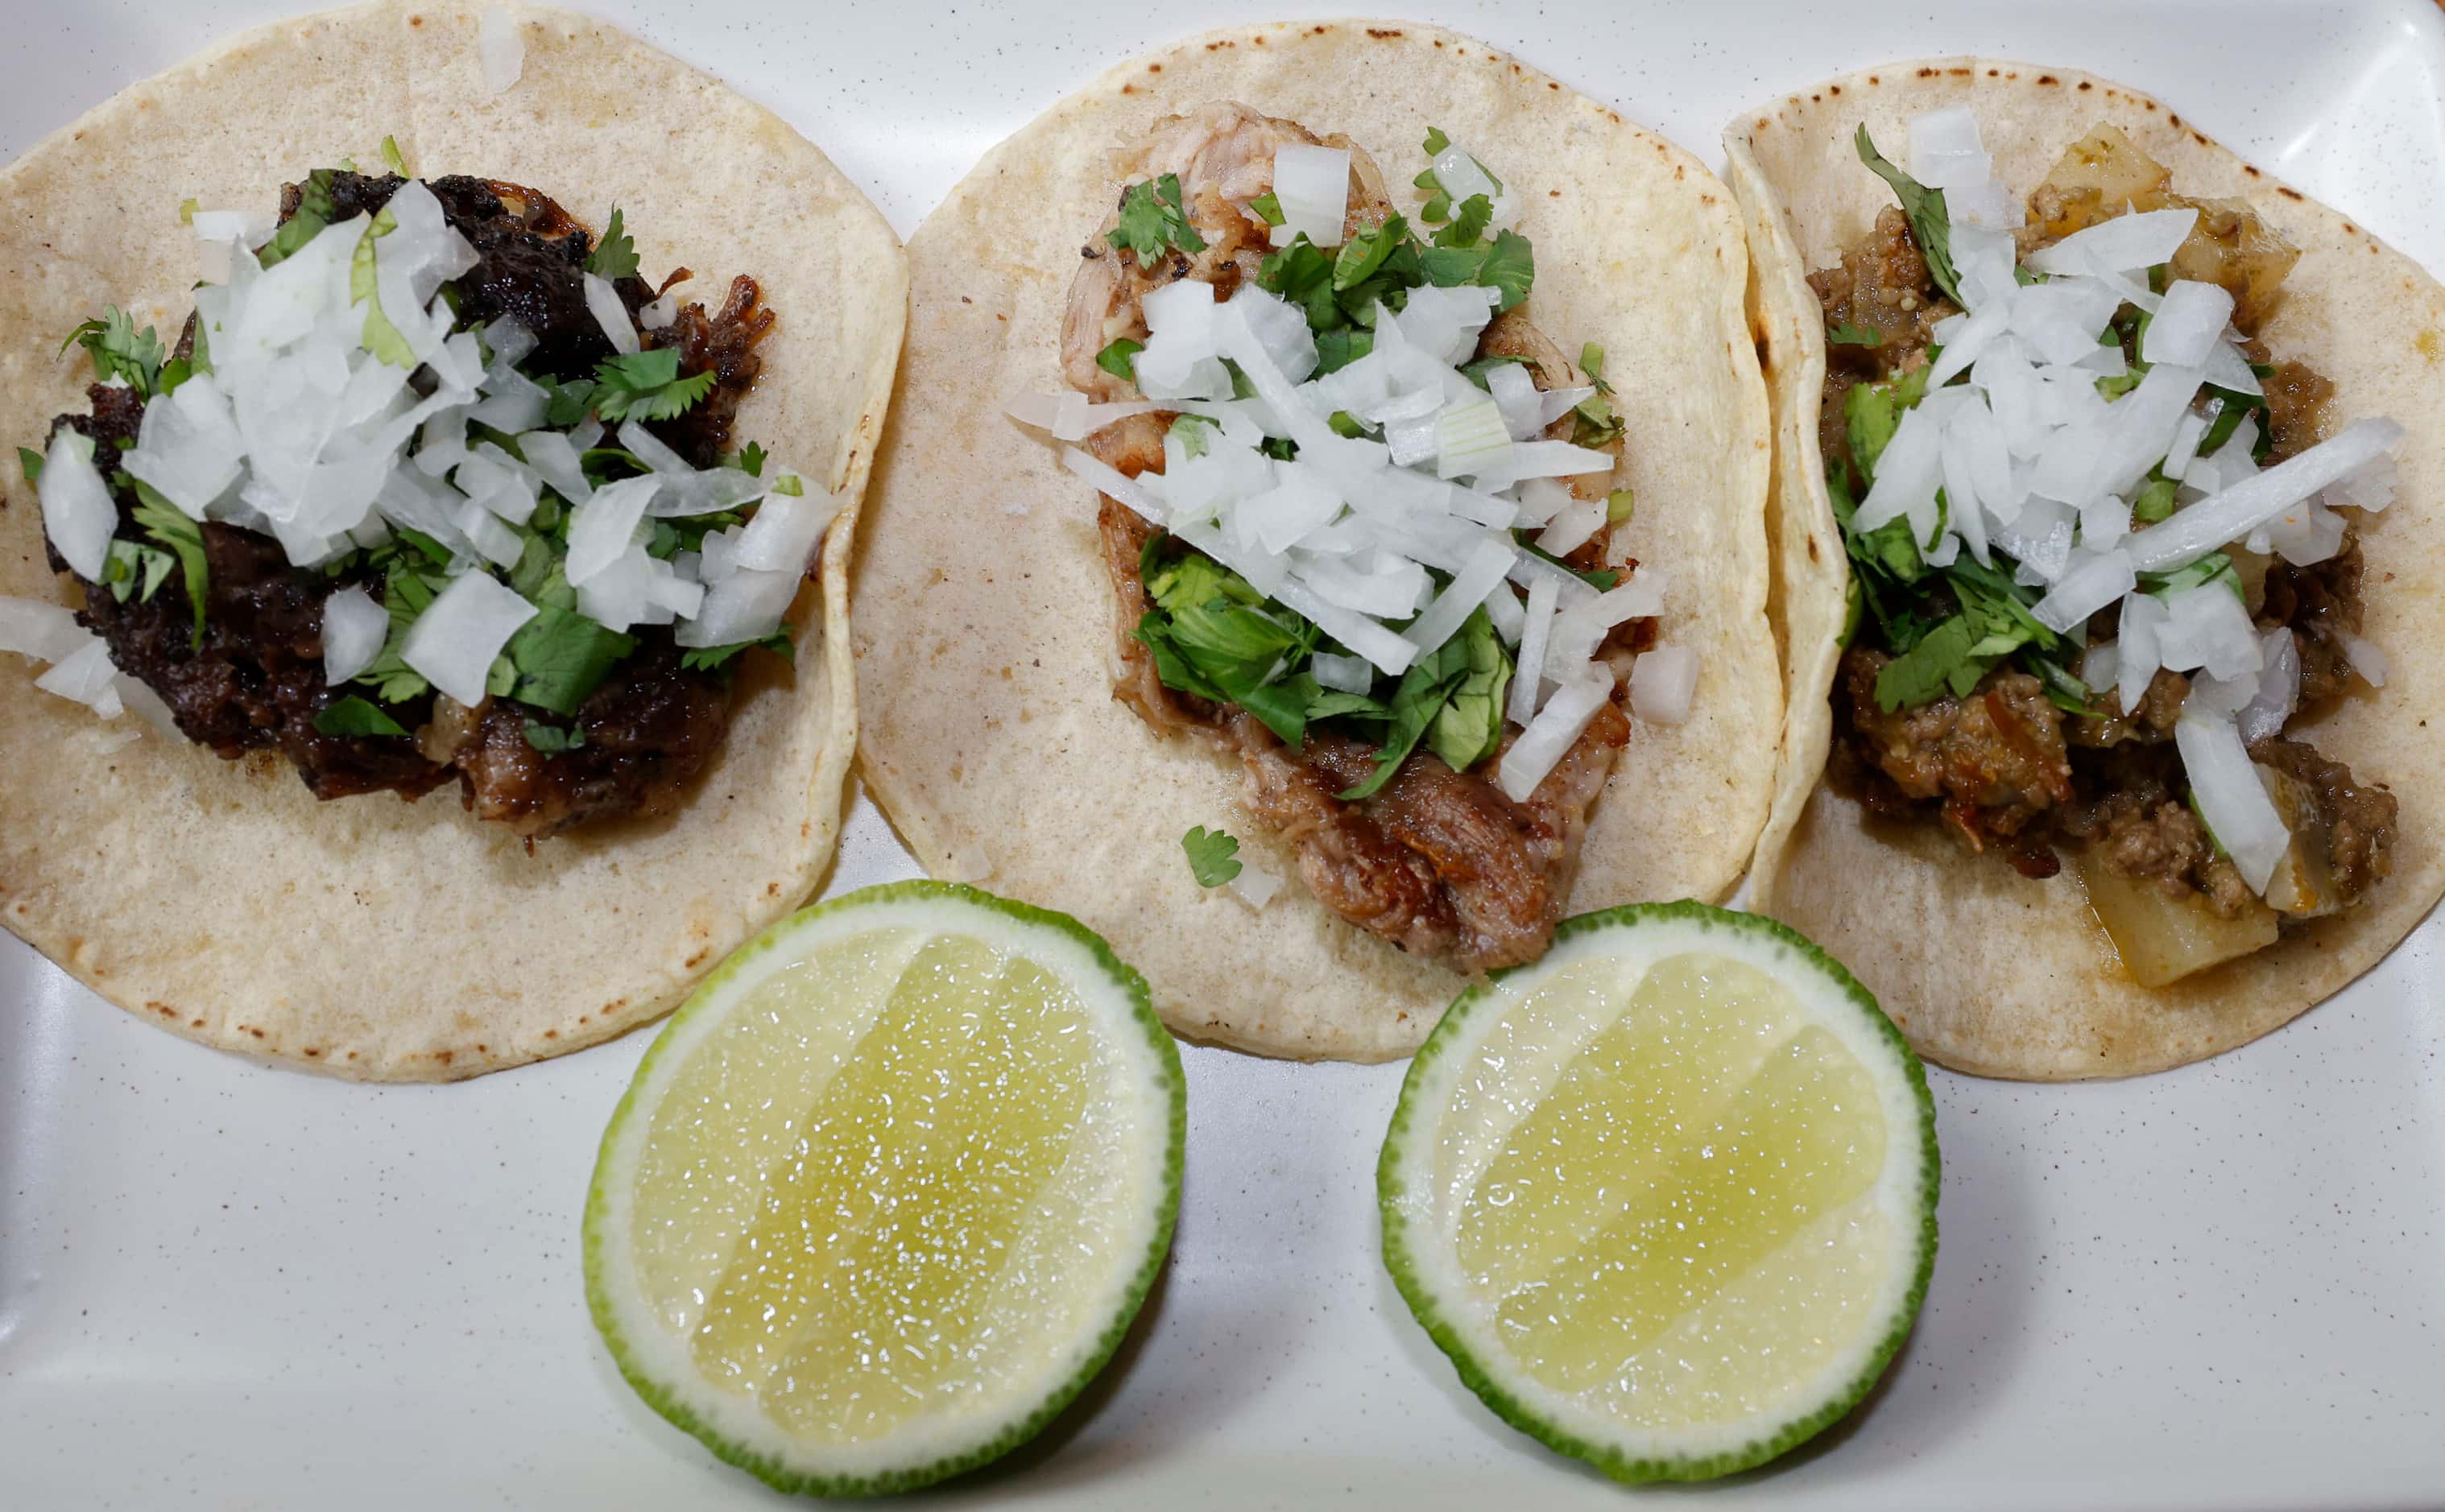 Chido Tacos and Tequila's street tacos are simple. Order several.